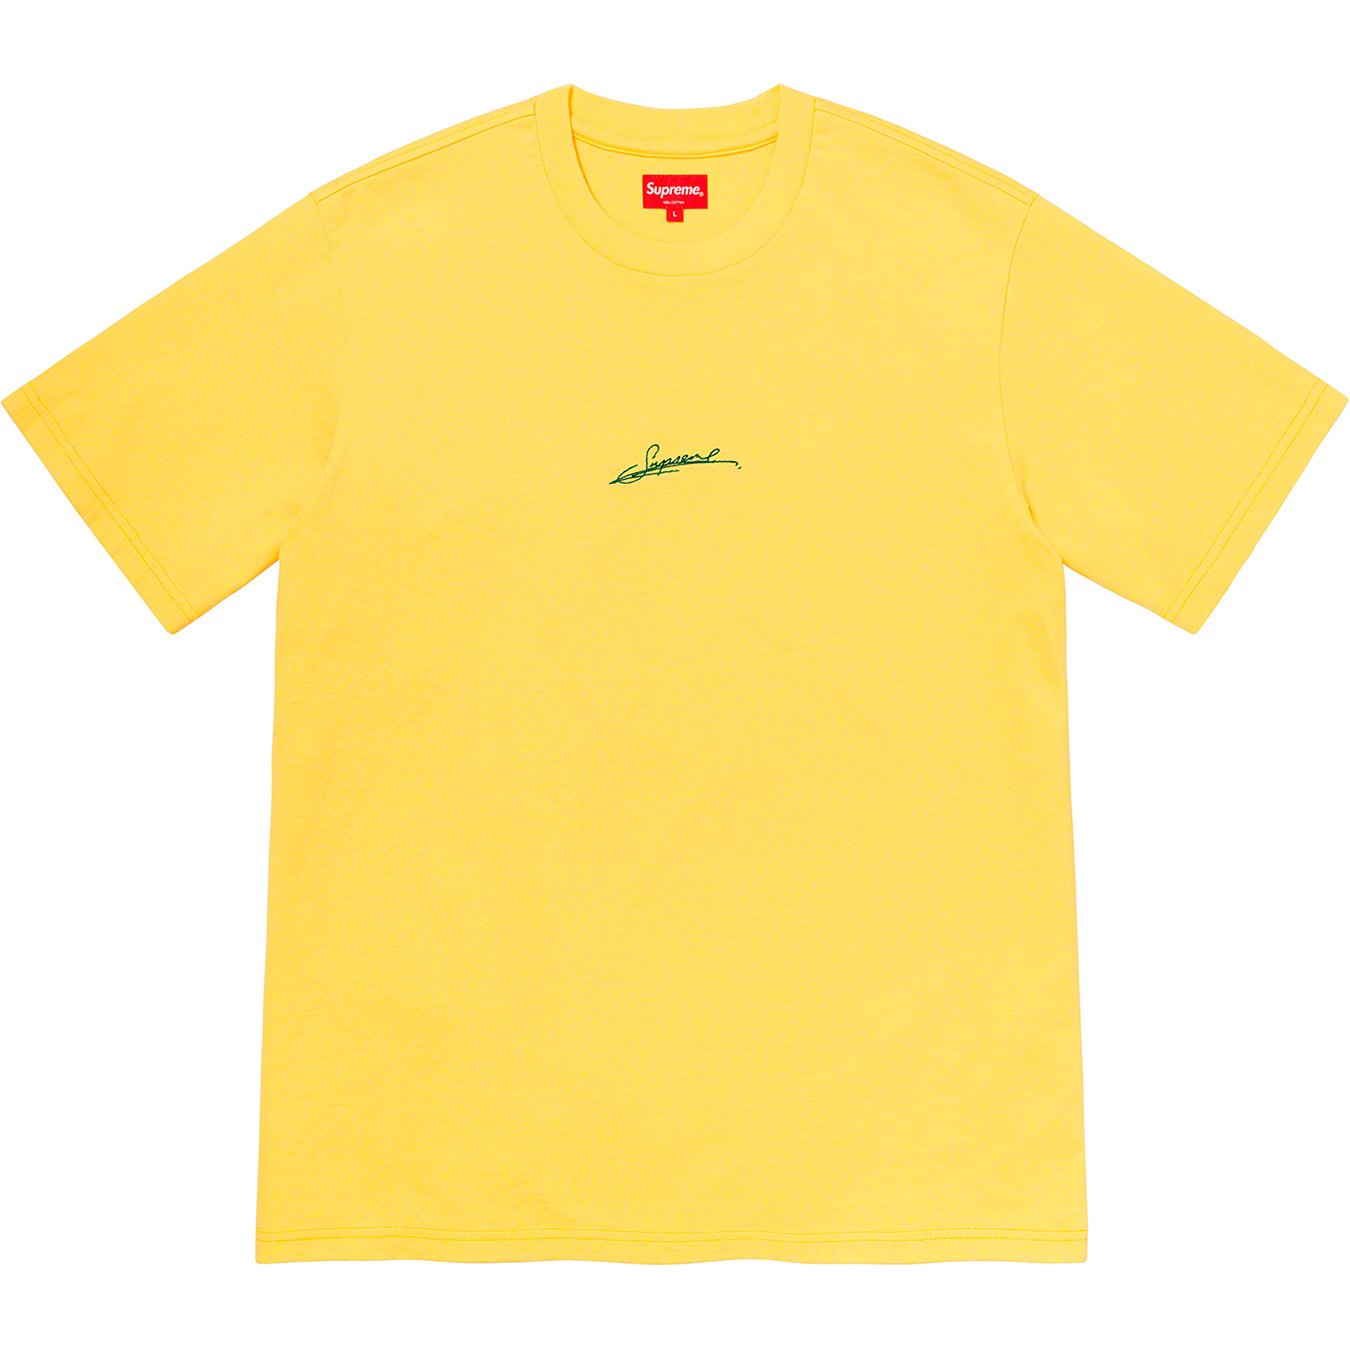 Signature S S Top - spring summer 2020 - Supreme